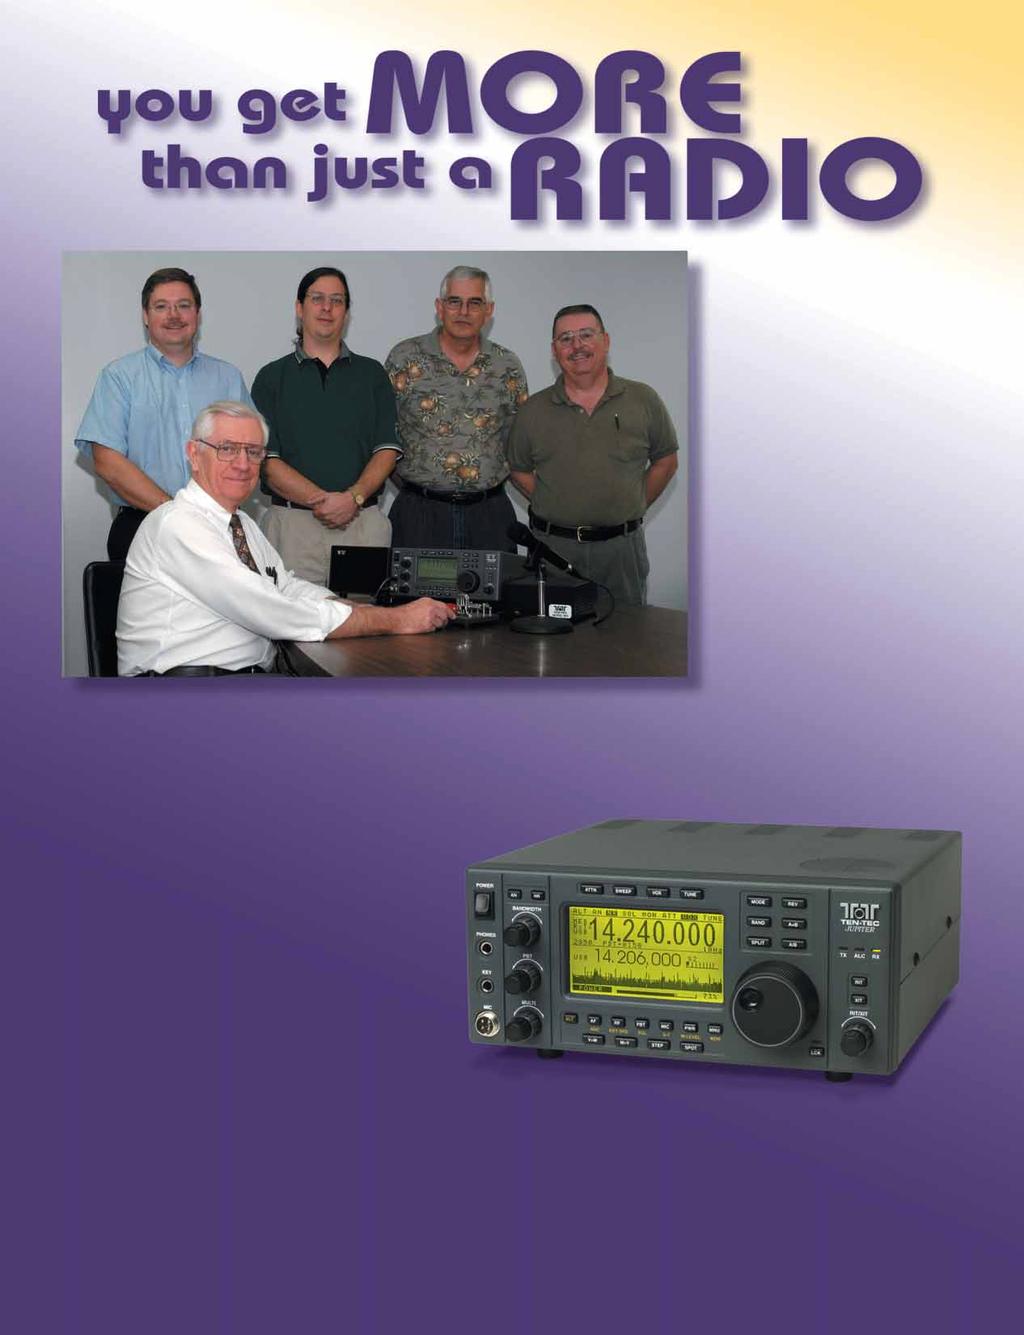 With Ten-Tec, you get more than just a radio.